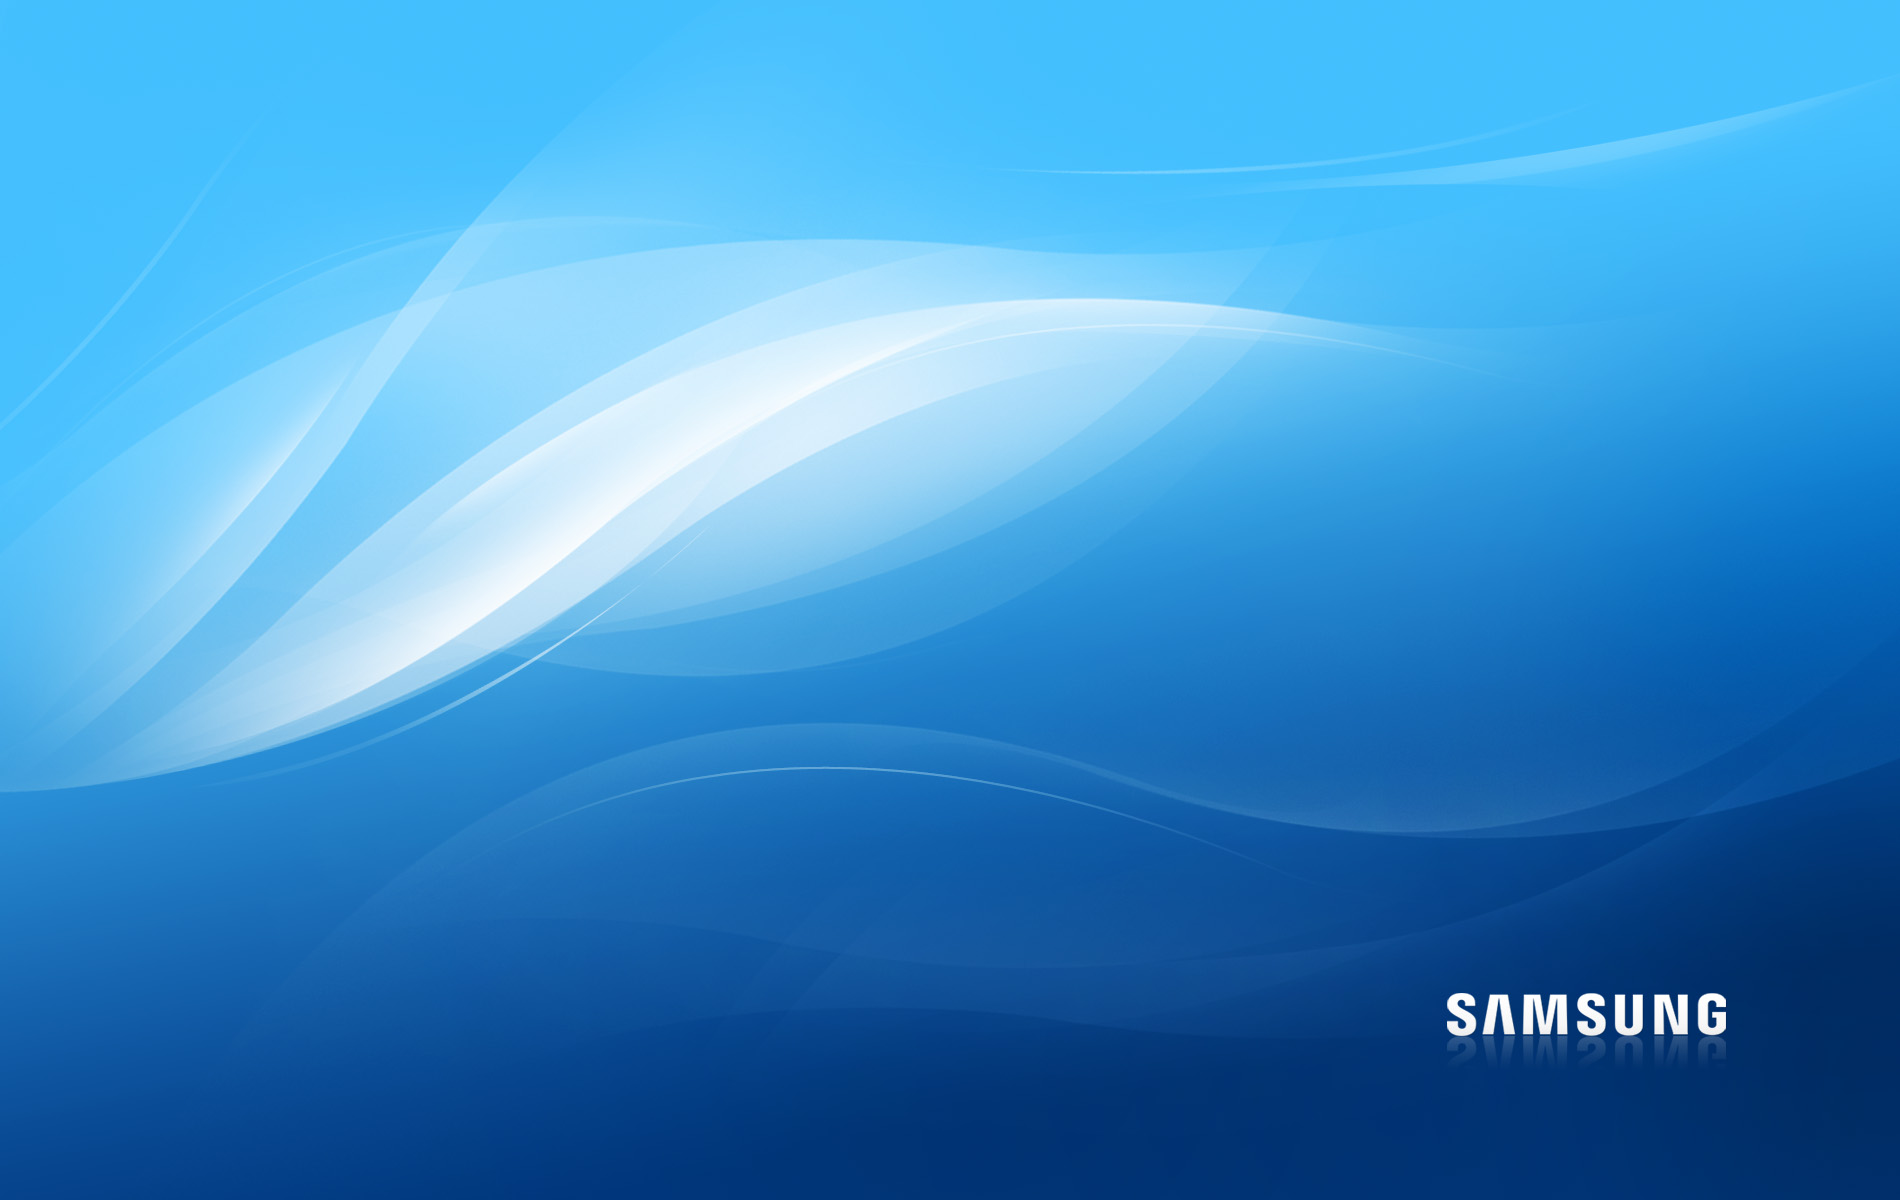 Samsung Wallpapers PC Doctor Ardee 1900x1200